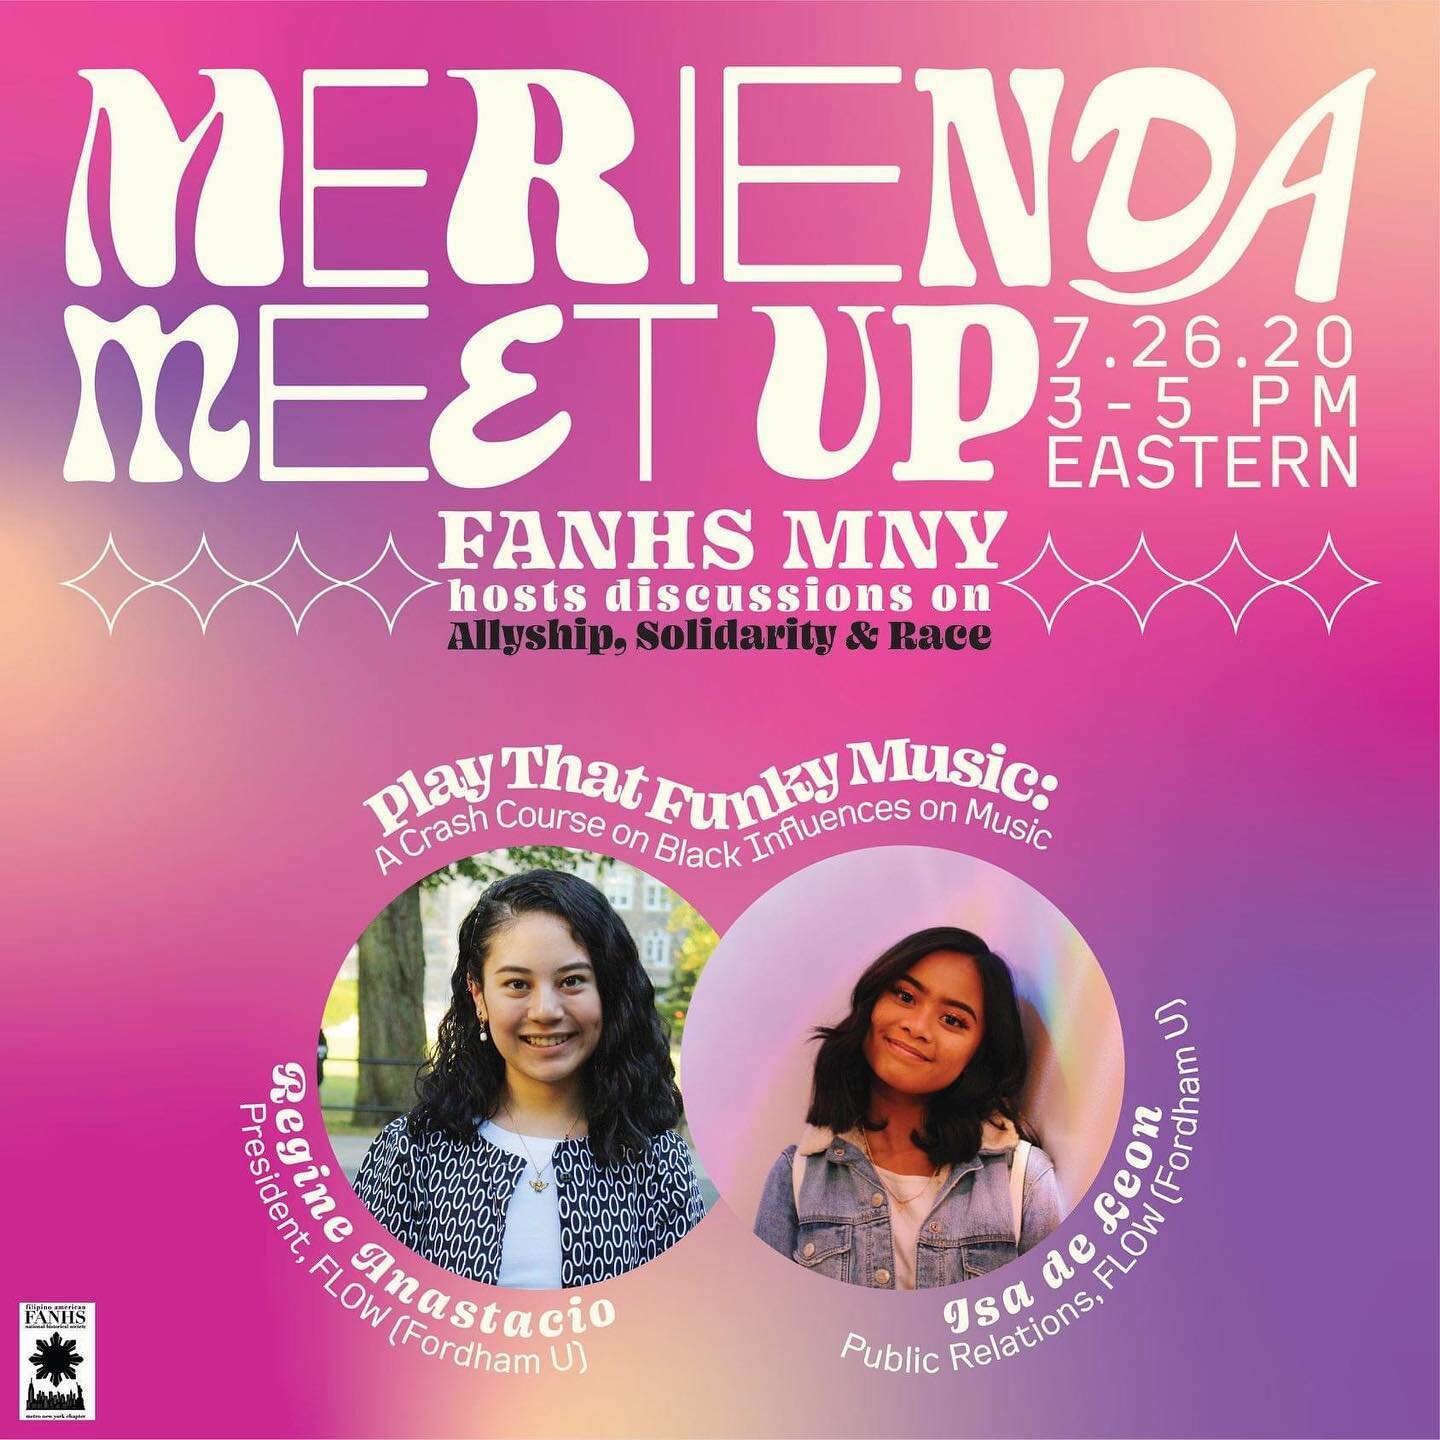 FANHS MNY Presents: Merienda Meetup 2.0 Speaker Introductions!

&quot;Play that Funky Music: A crash course on Black Influence on Music&quot; by Regine Anastacio &amp; Isa de Leon of Filipinos of LC Offering Welcome -  @flow.fclc 

The talk discusses